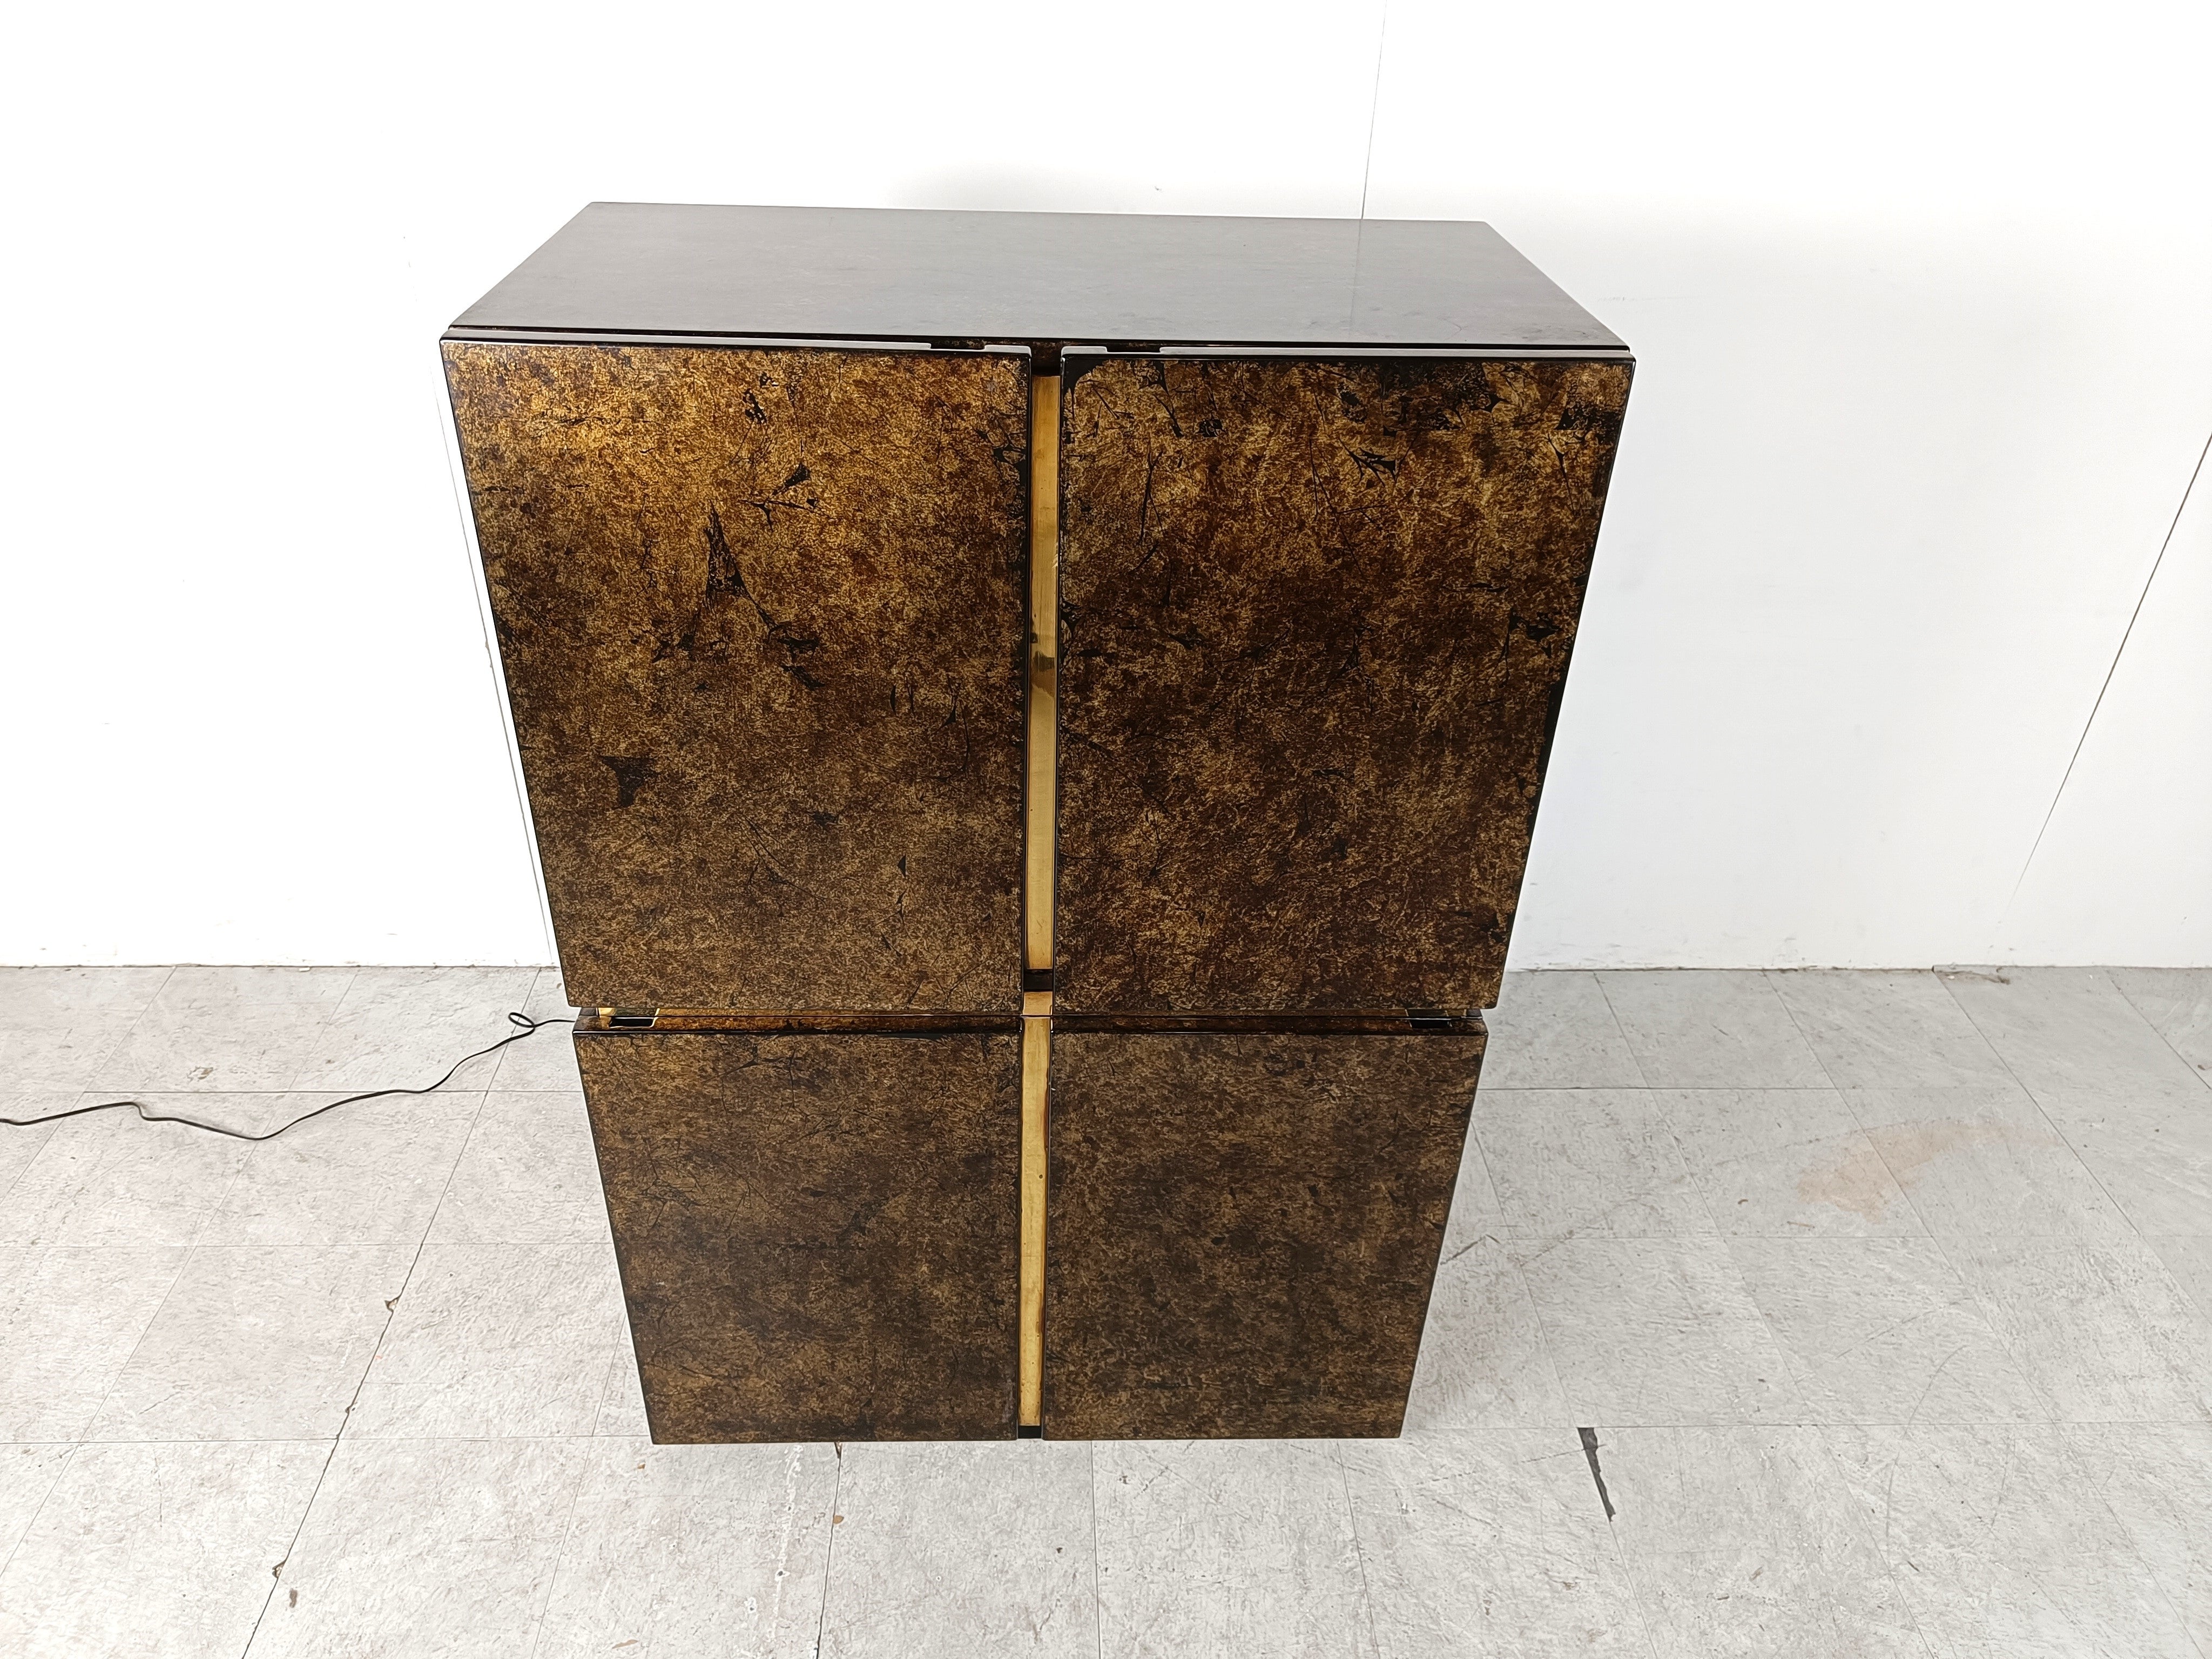 High quality chinoiserie lacquered bar cabinet consisting of an illuminated  bar compartment with two doors and a special gilded glass finish.

The bottom of the cabinet is a large drawer providing lots of storage space.

Beautiful piece of